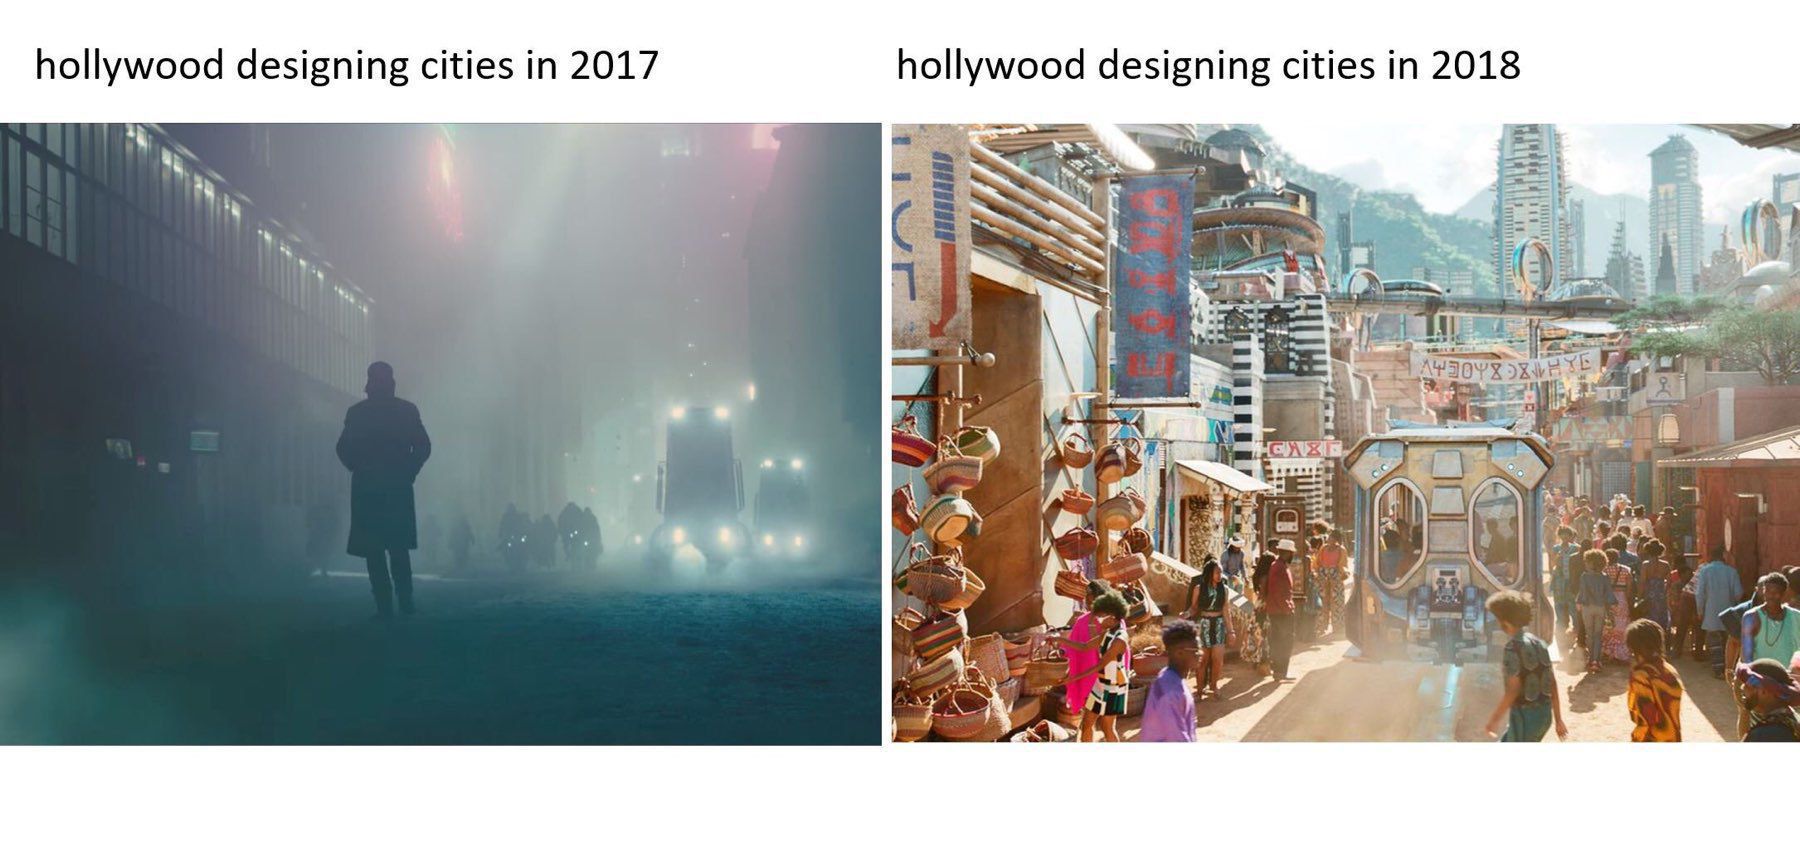 IMAGE FROM TWITTER: how Hollywood designed cities in 2017 and 2018